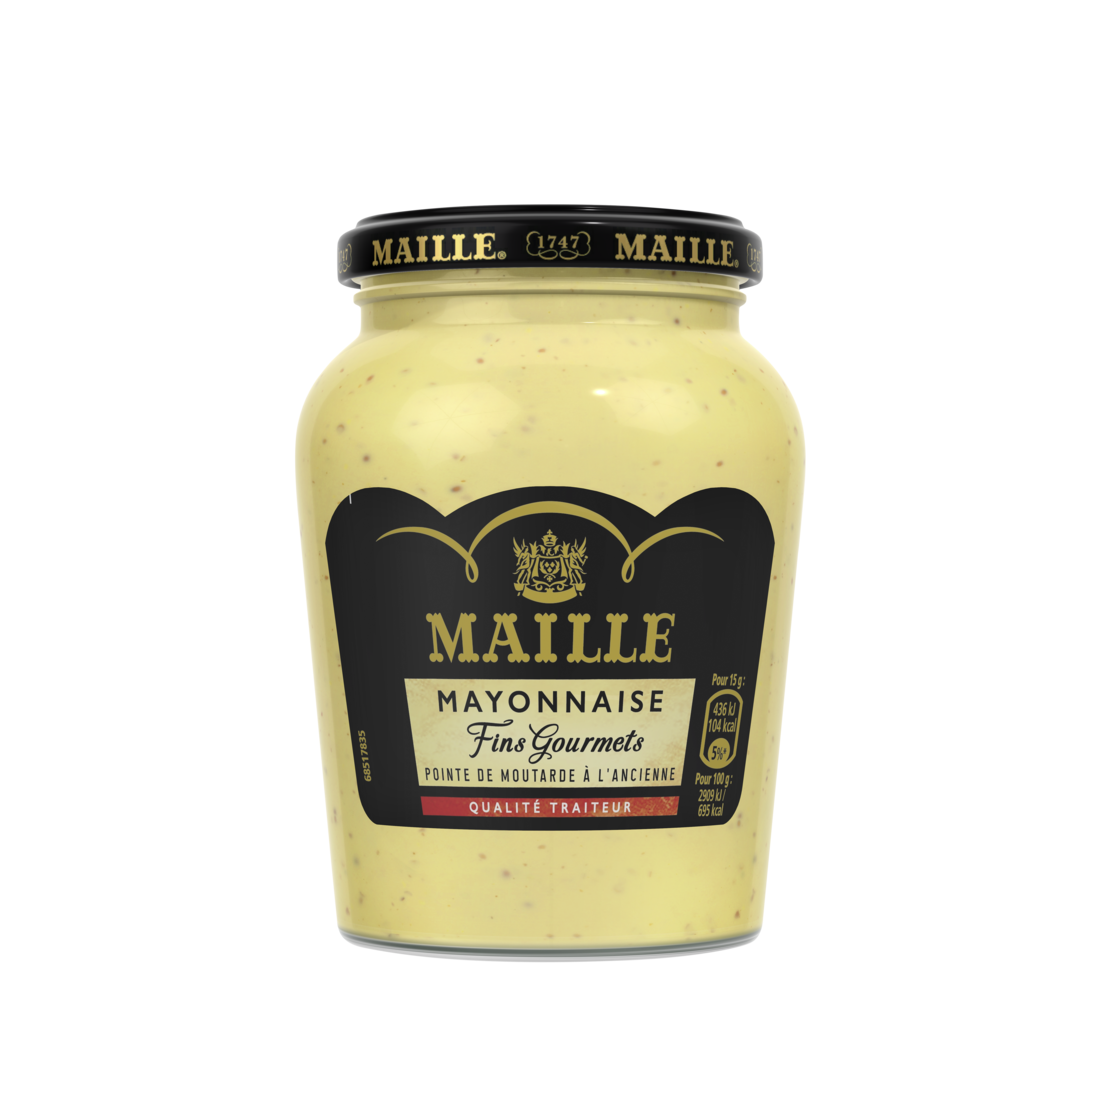 Maille - Mayonnaise Fins Gourmets Bocal 320 g, overview